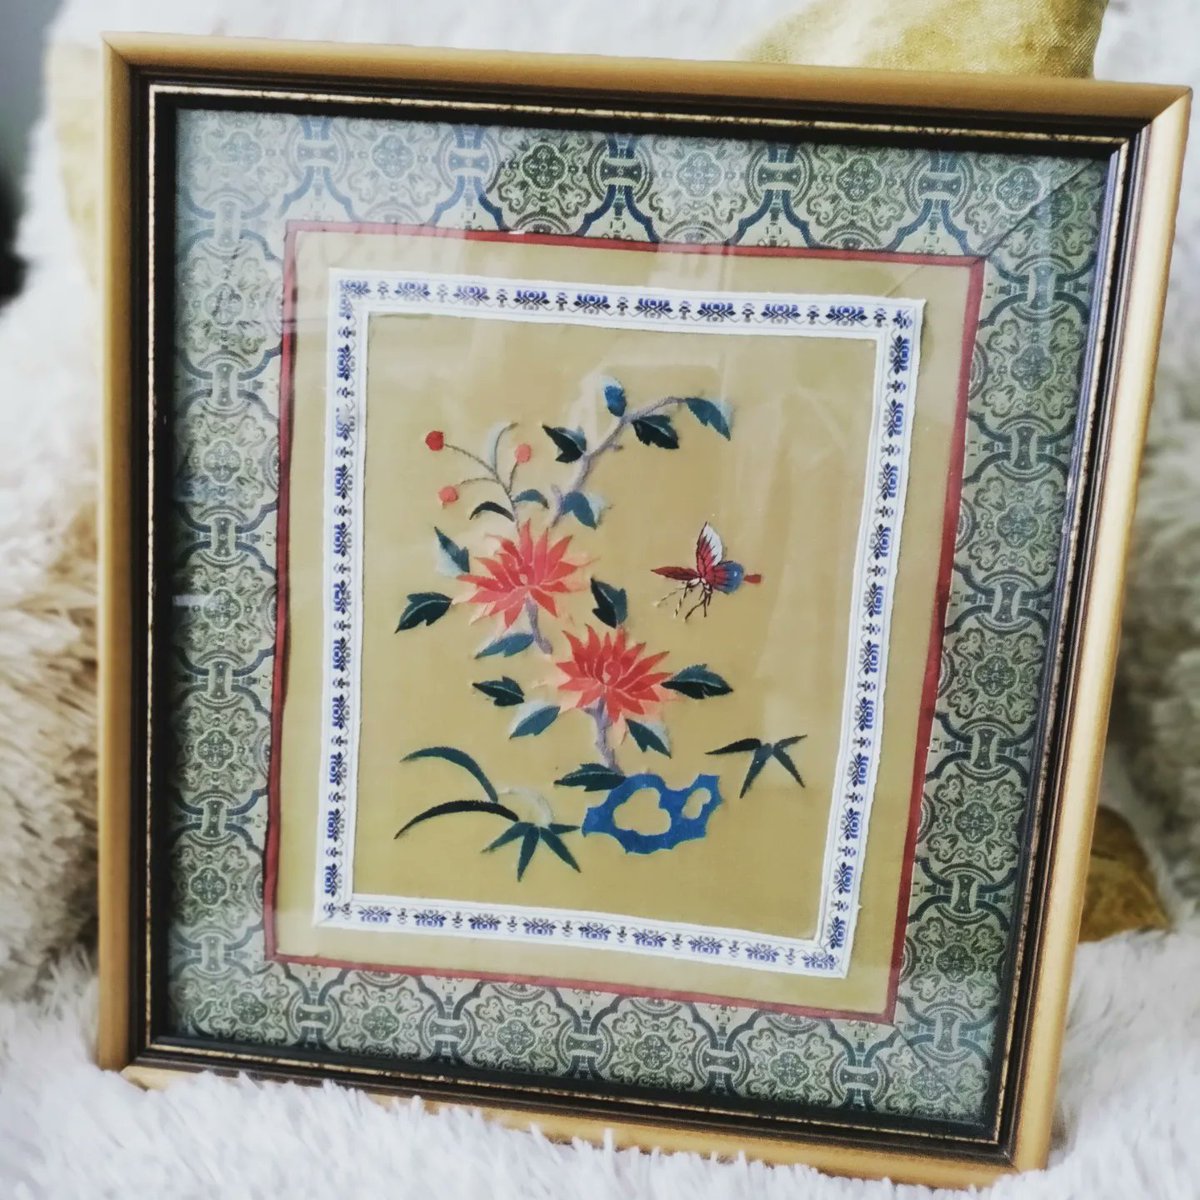 Add some #vintagedecor to your home : newly listed Beautiful Vintage Chinese Silk  Embroidery Pictures #onsale 
#onlineshop 🛍️ @chicdevintage1 ChicDeVintage1.Etsy.com

 #homedecorating  #chinoiseriechicstyle #vintagewallart  #vintagefinds 
#storewidesale #uniquefinds #etsyshop